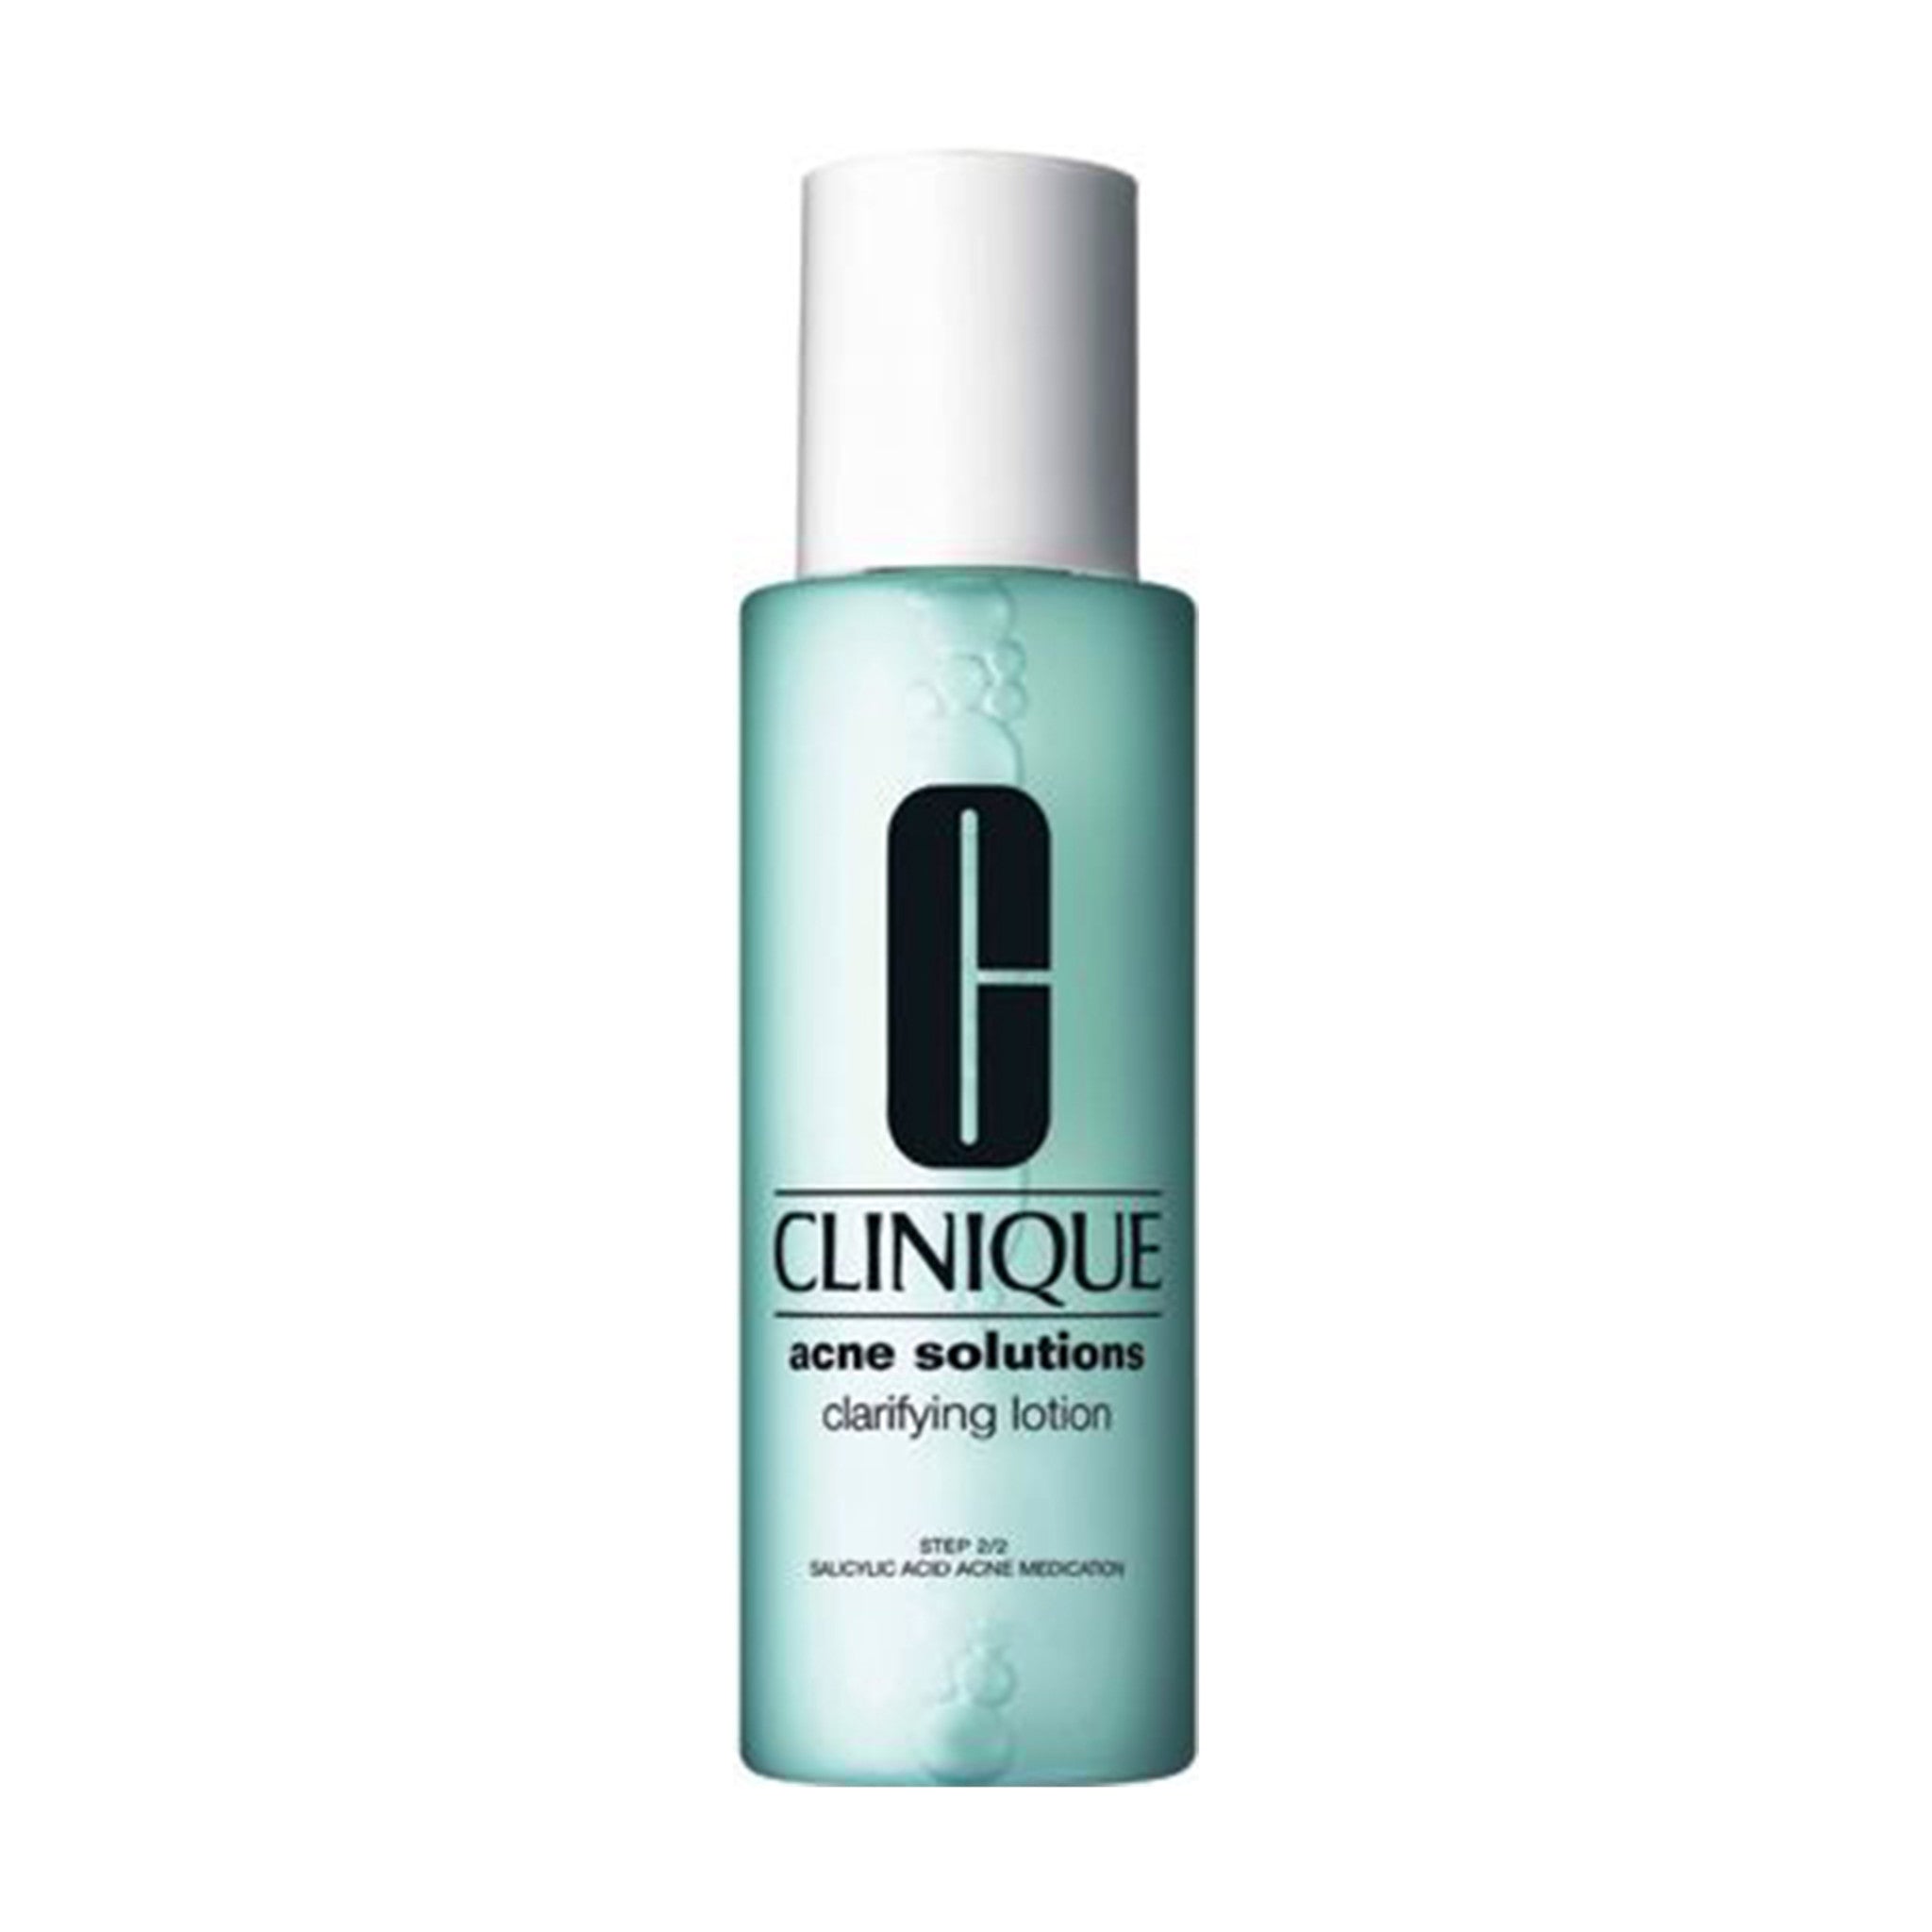 Clinique Acne Solutions Clarifying Lotion main image.